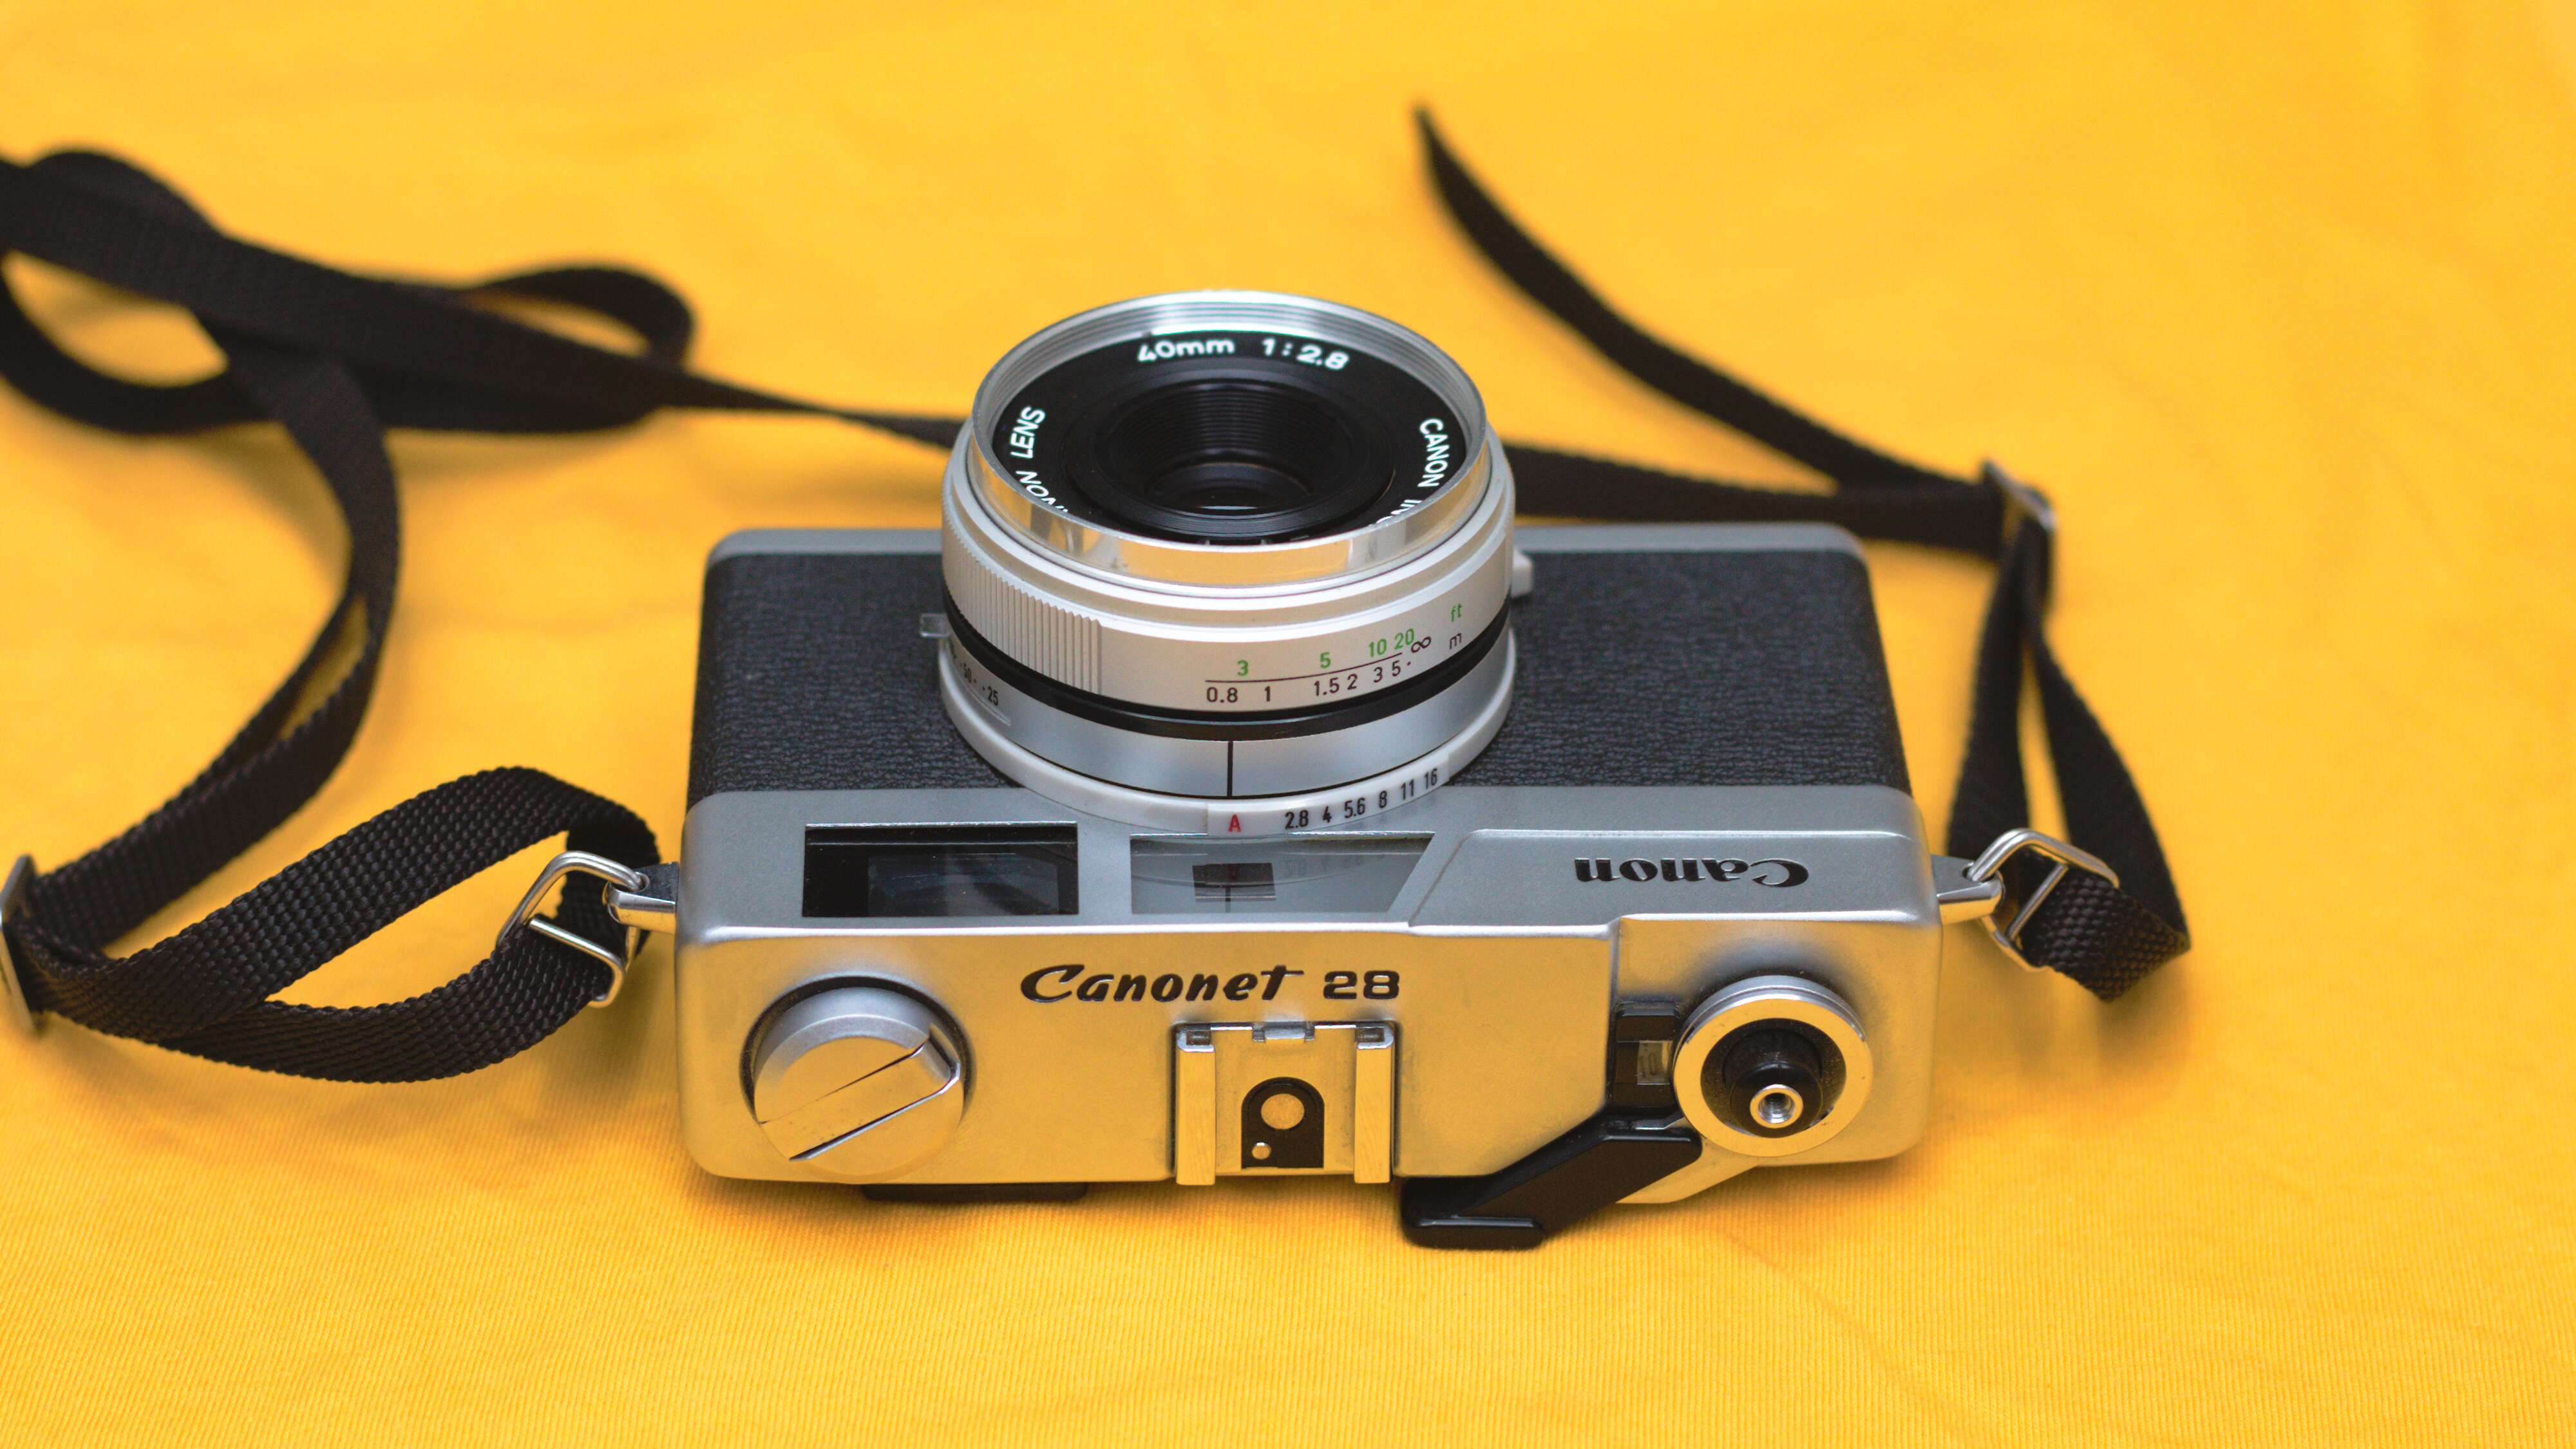 Canon Canonet 28: The beauty that lies in simplicity